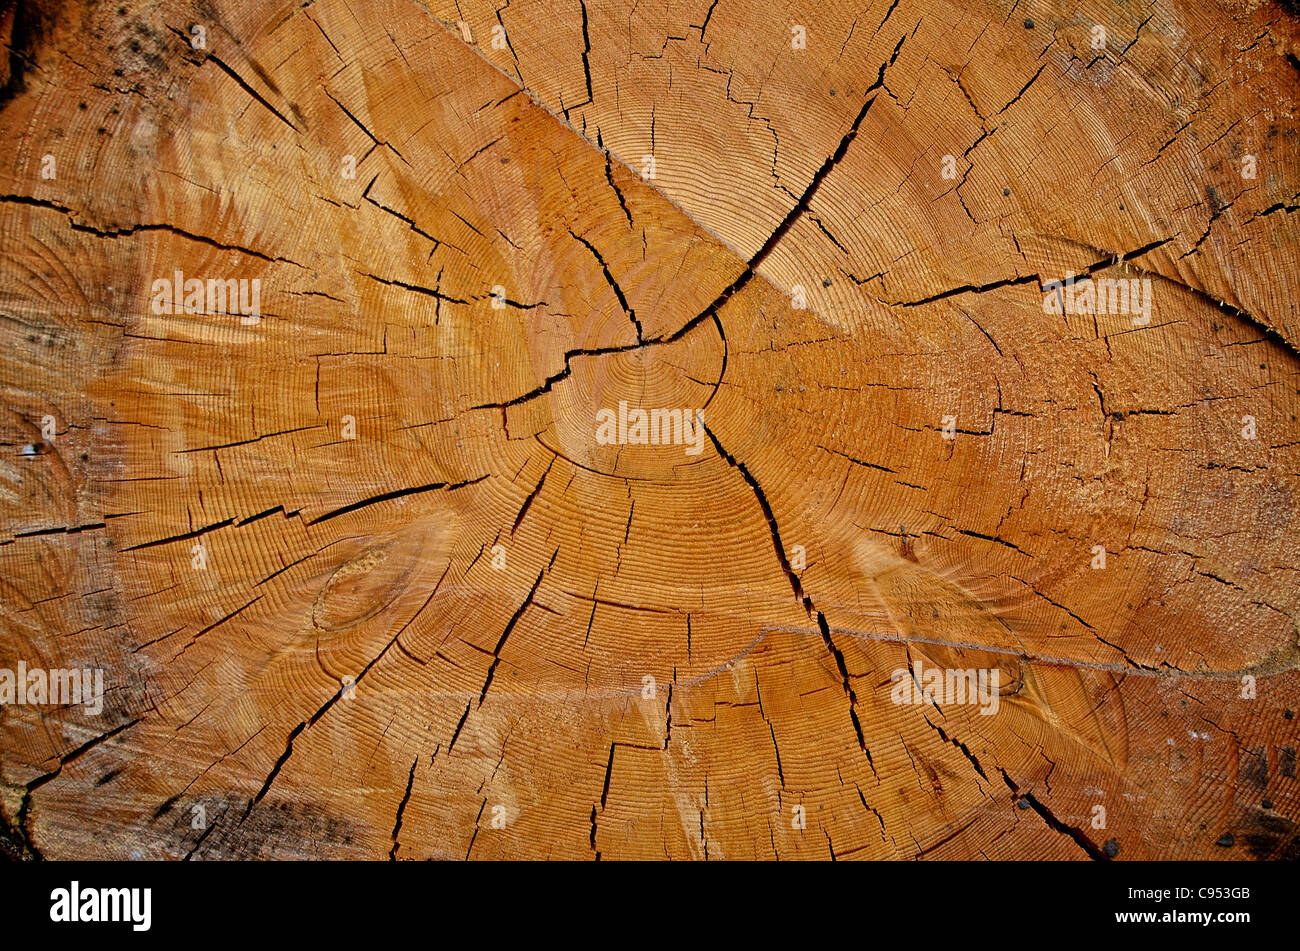 A close-up detail of a freshly-cut tree trunk displaying concentric rings and cracks in the wood Stock Photo